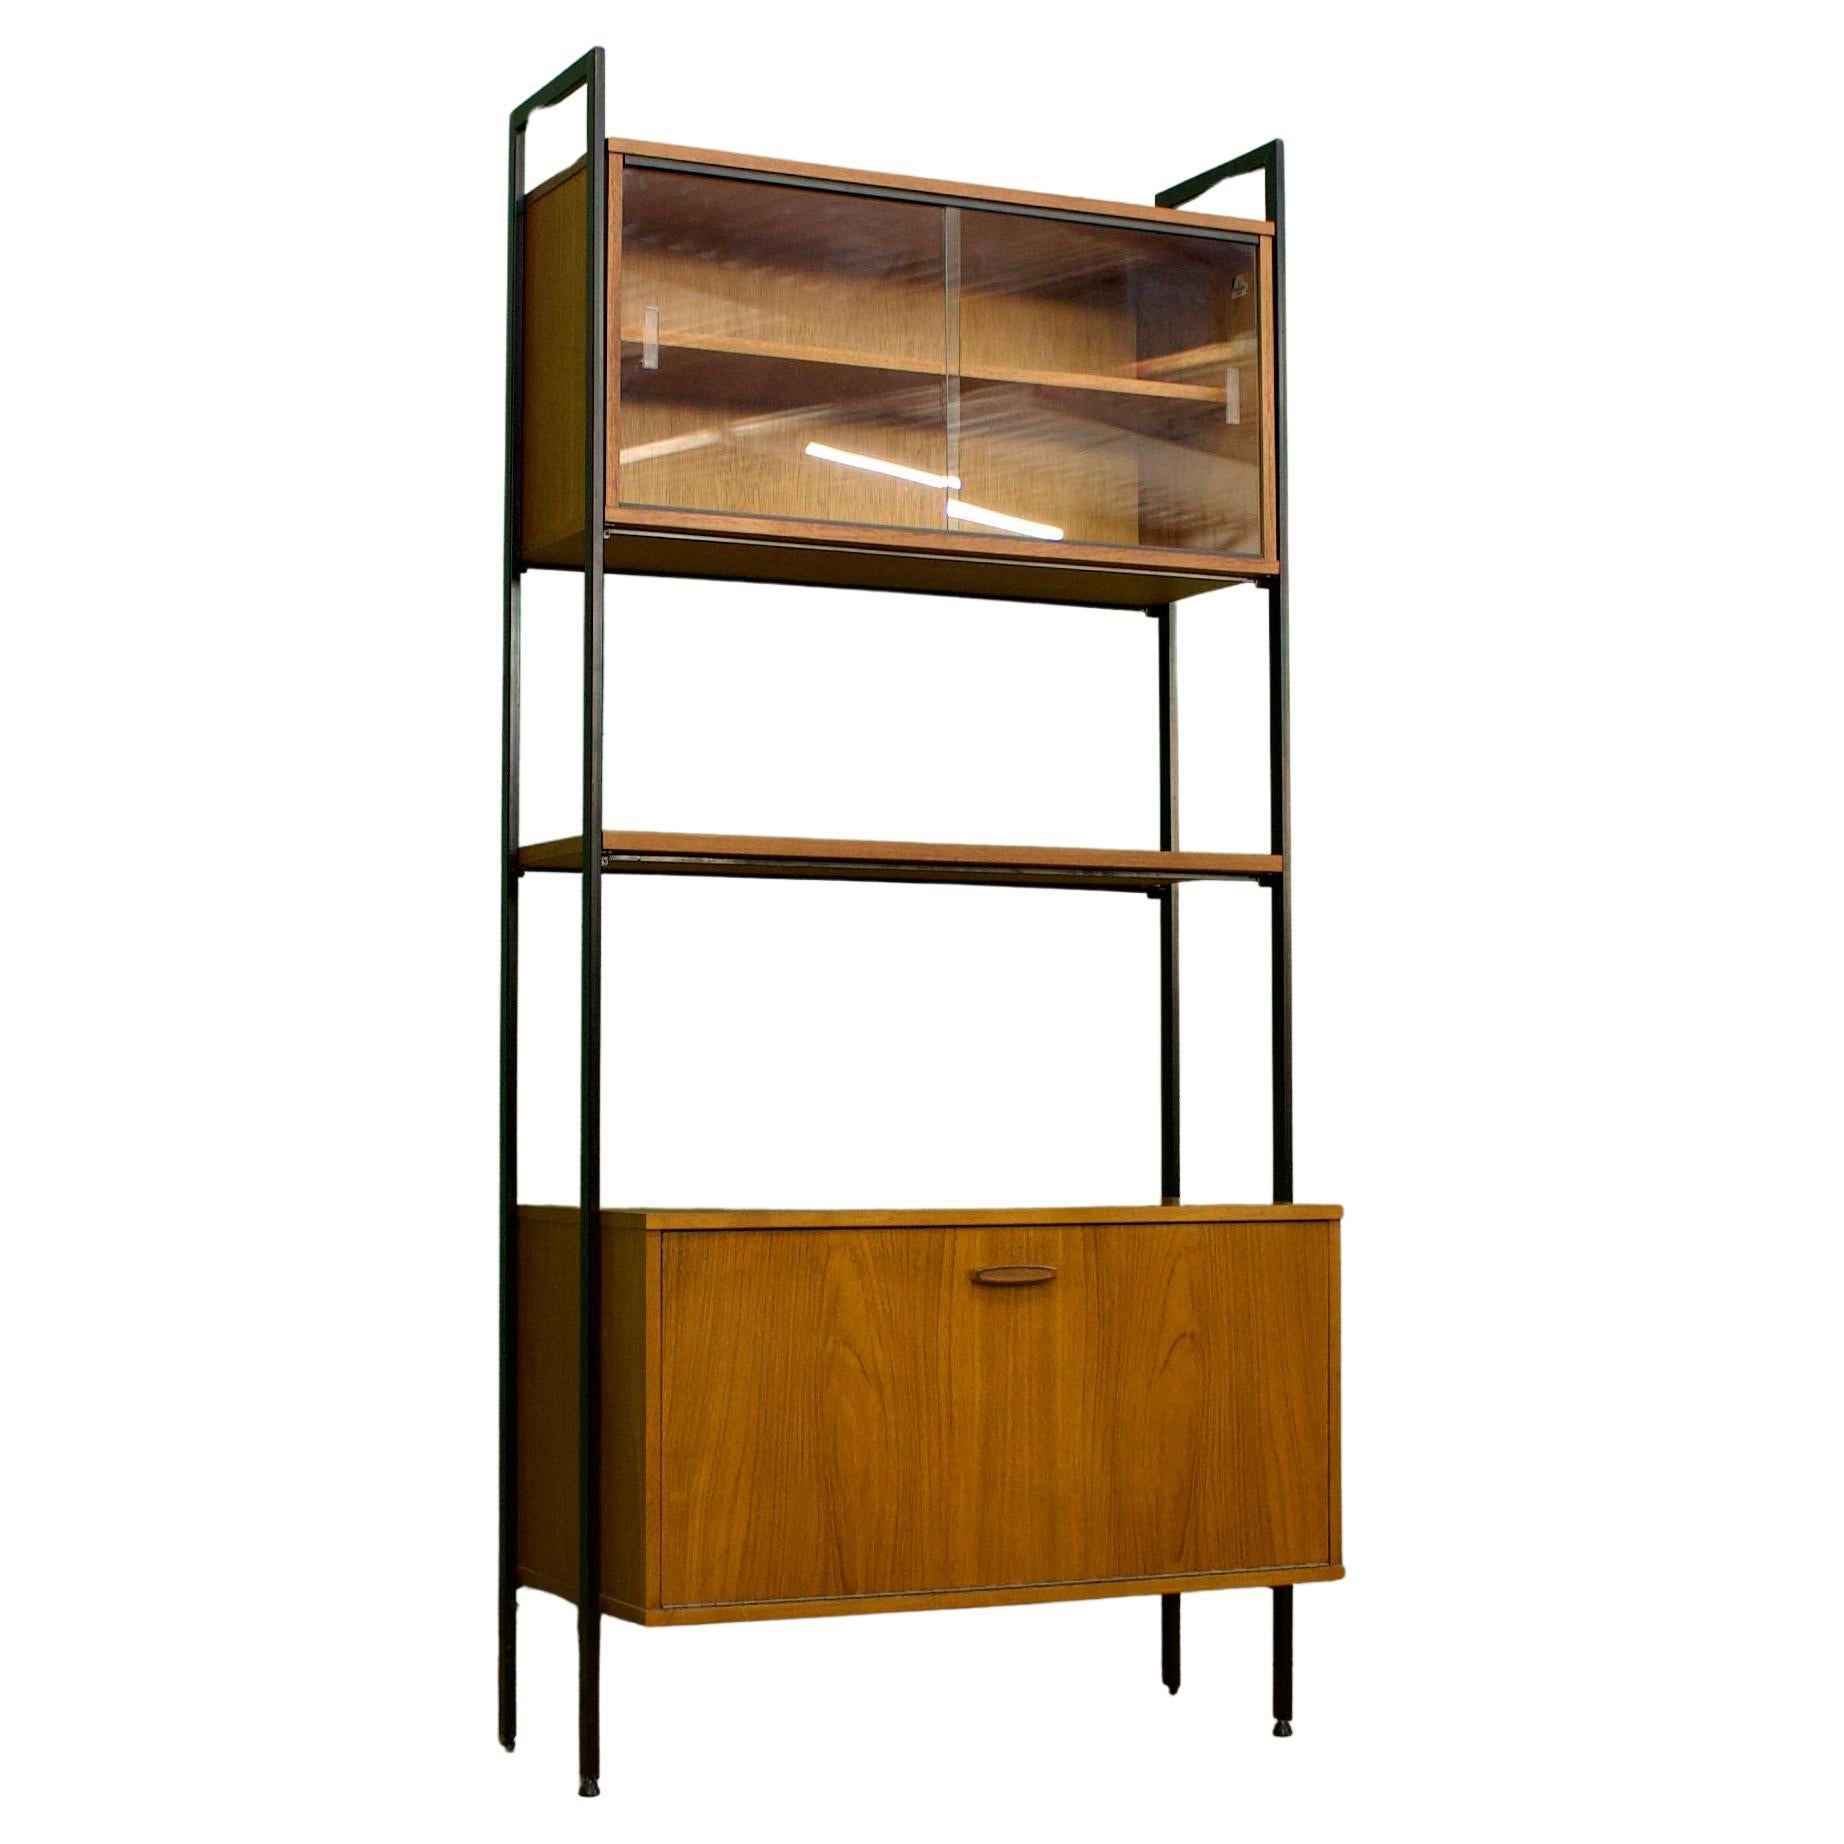 Mid Century Teak Wall or Shelving Unit from Avalon, 1960s